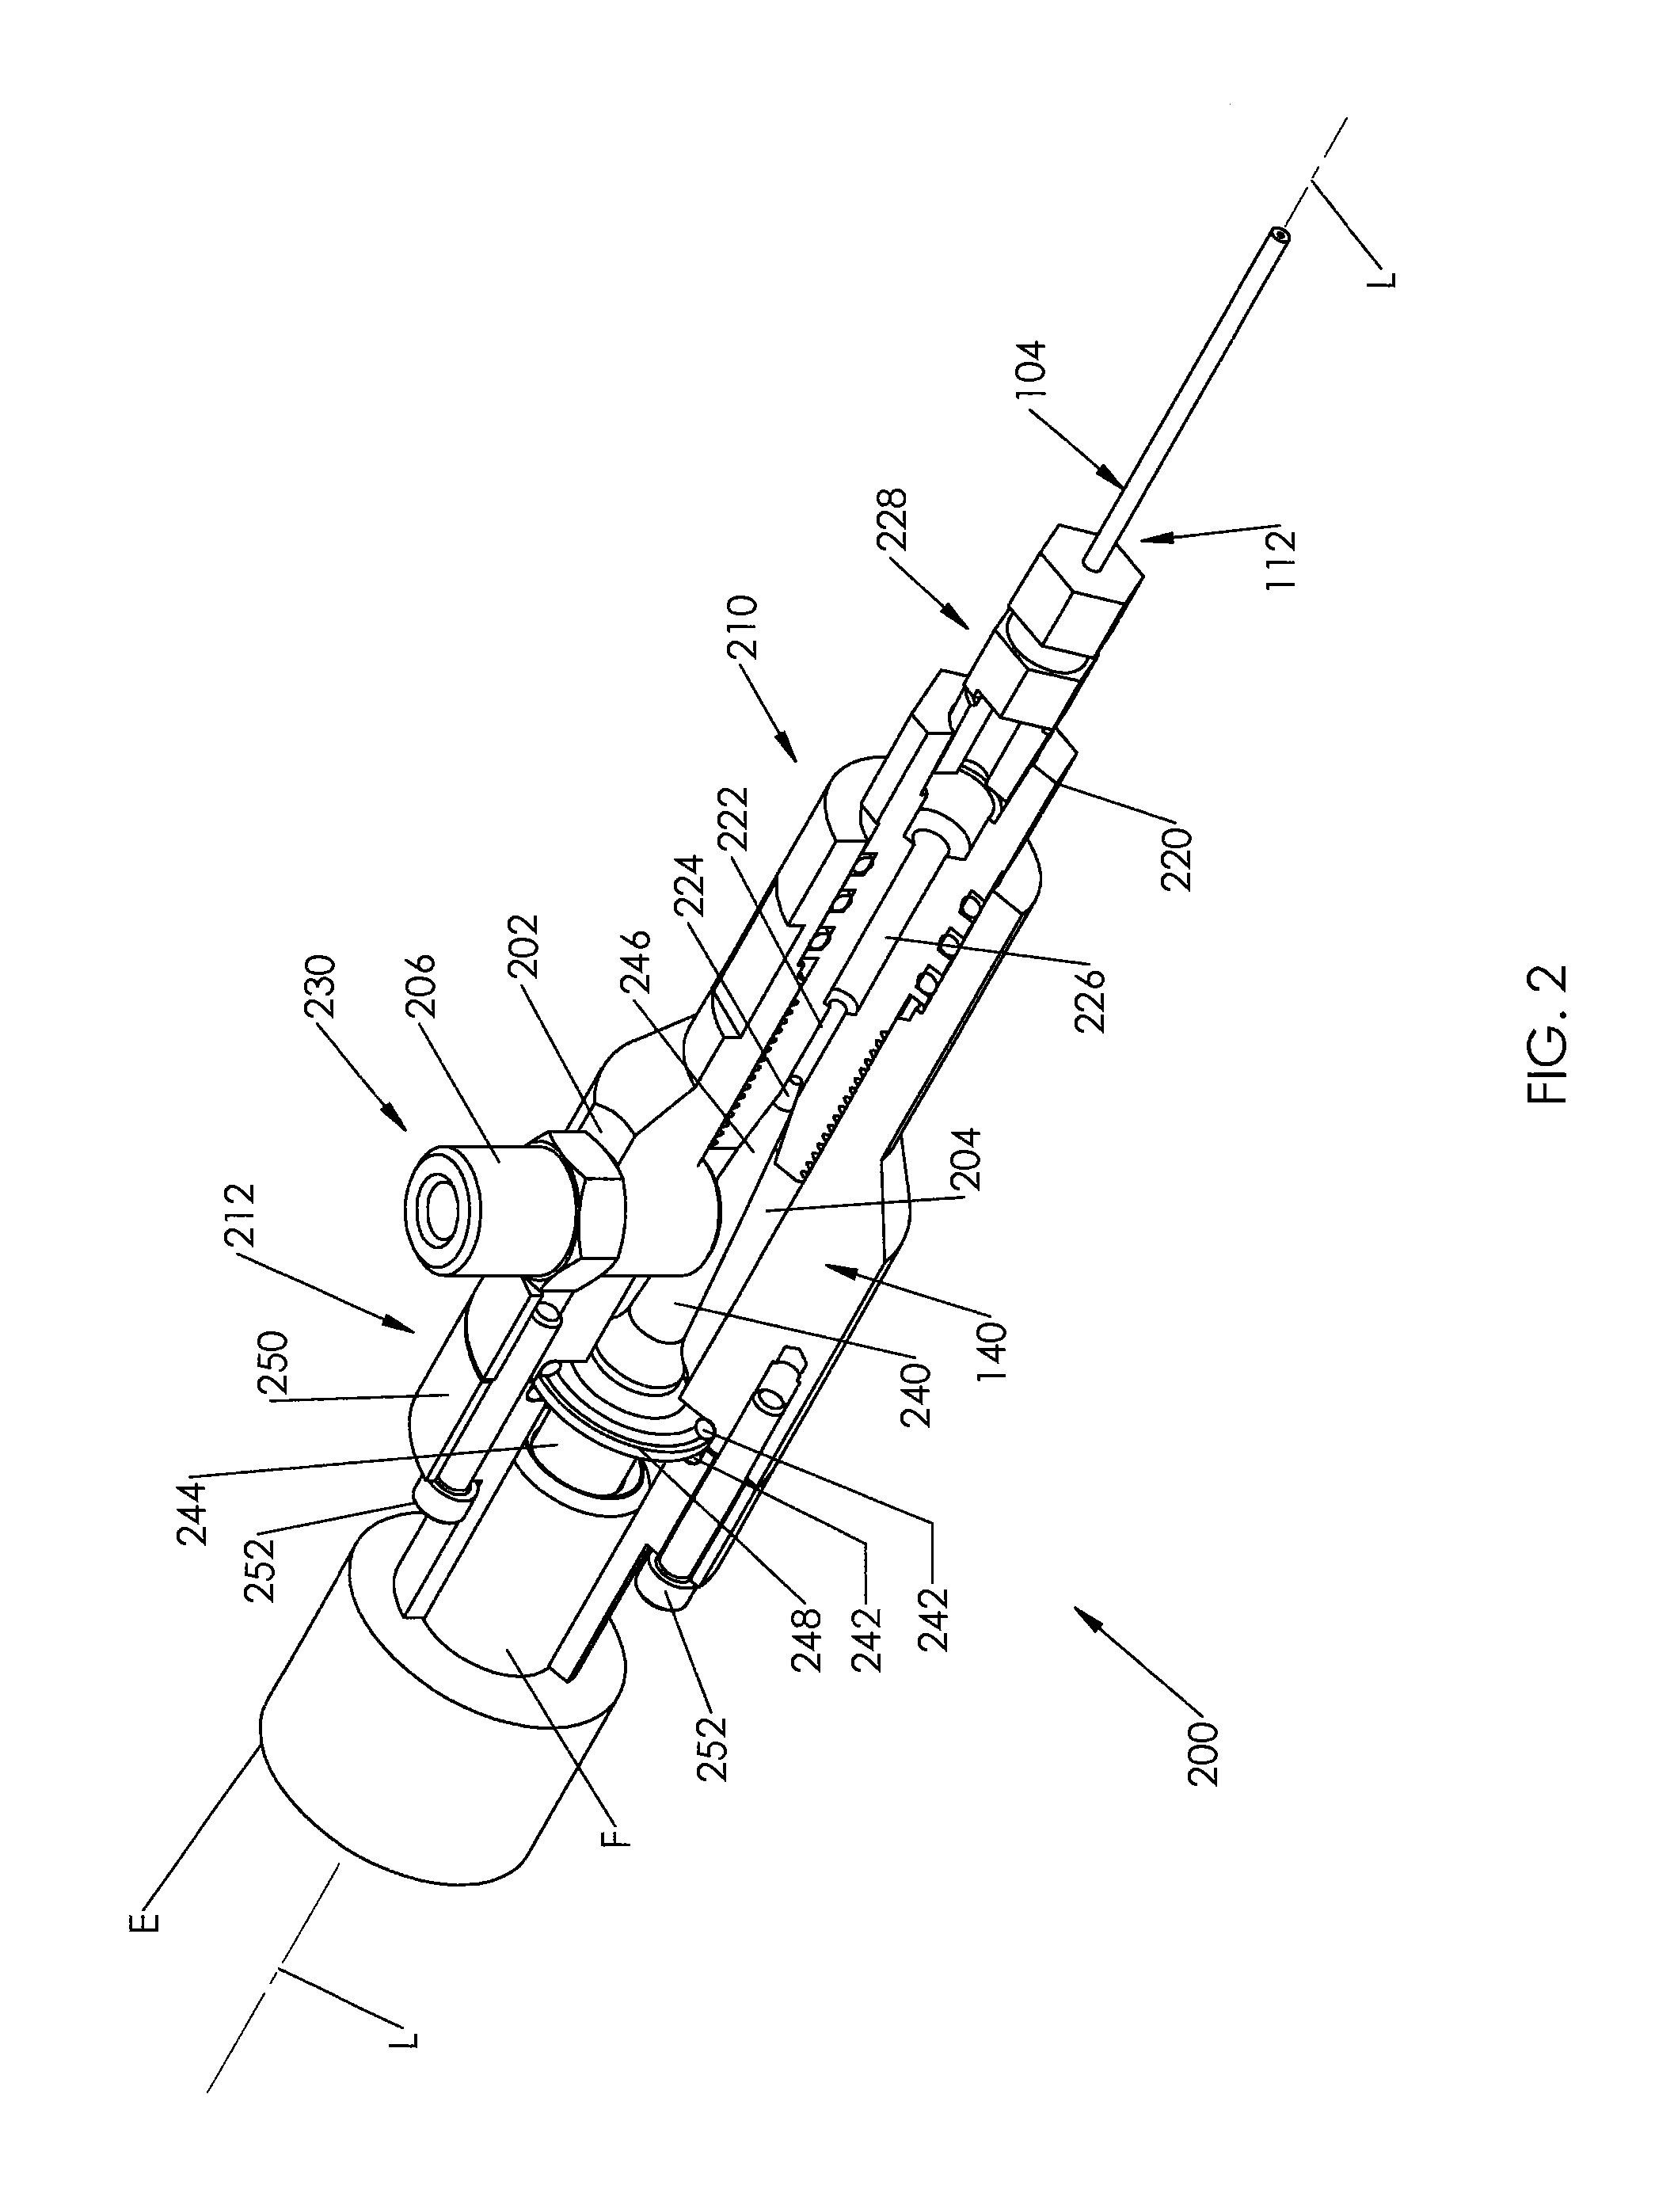 Fluid jet cell harvester and cellular delivery system